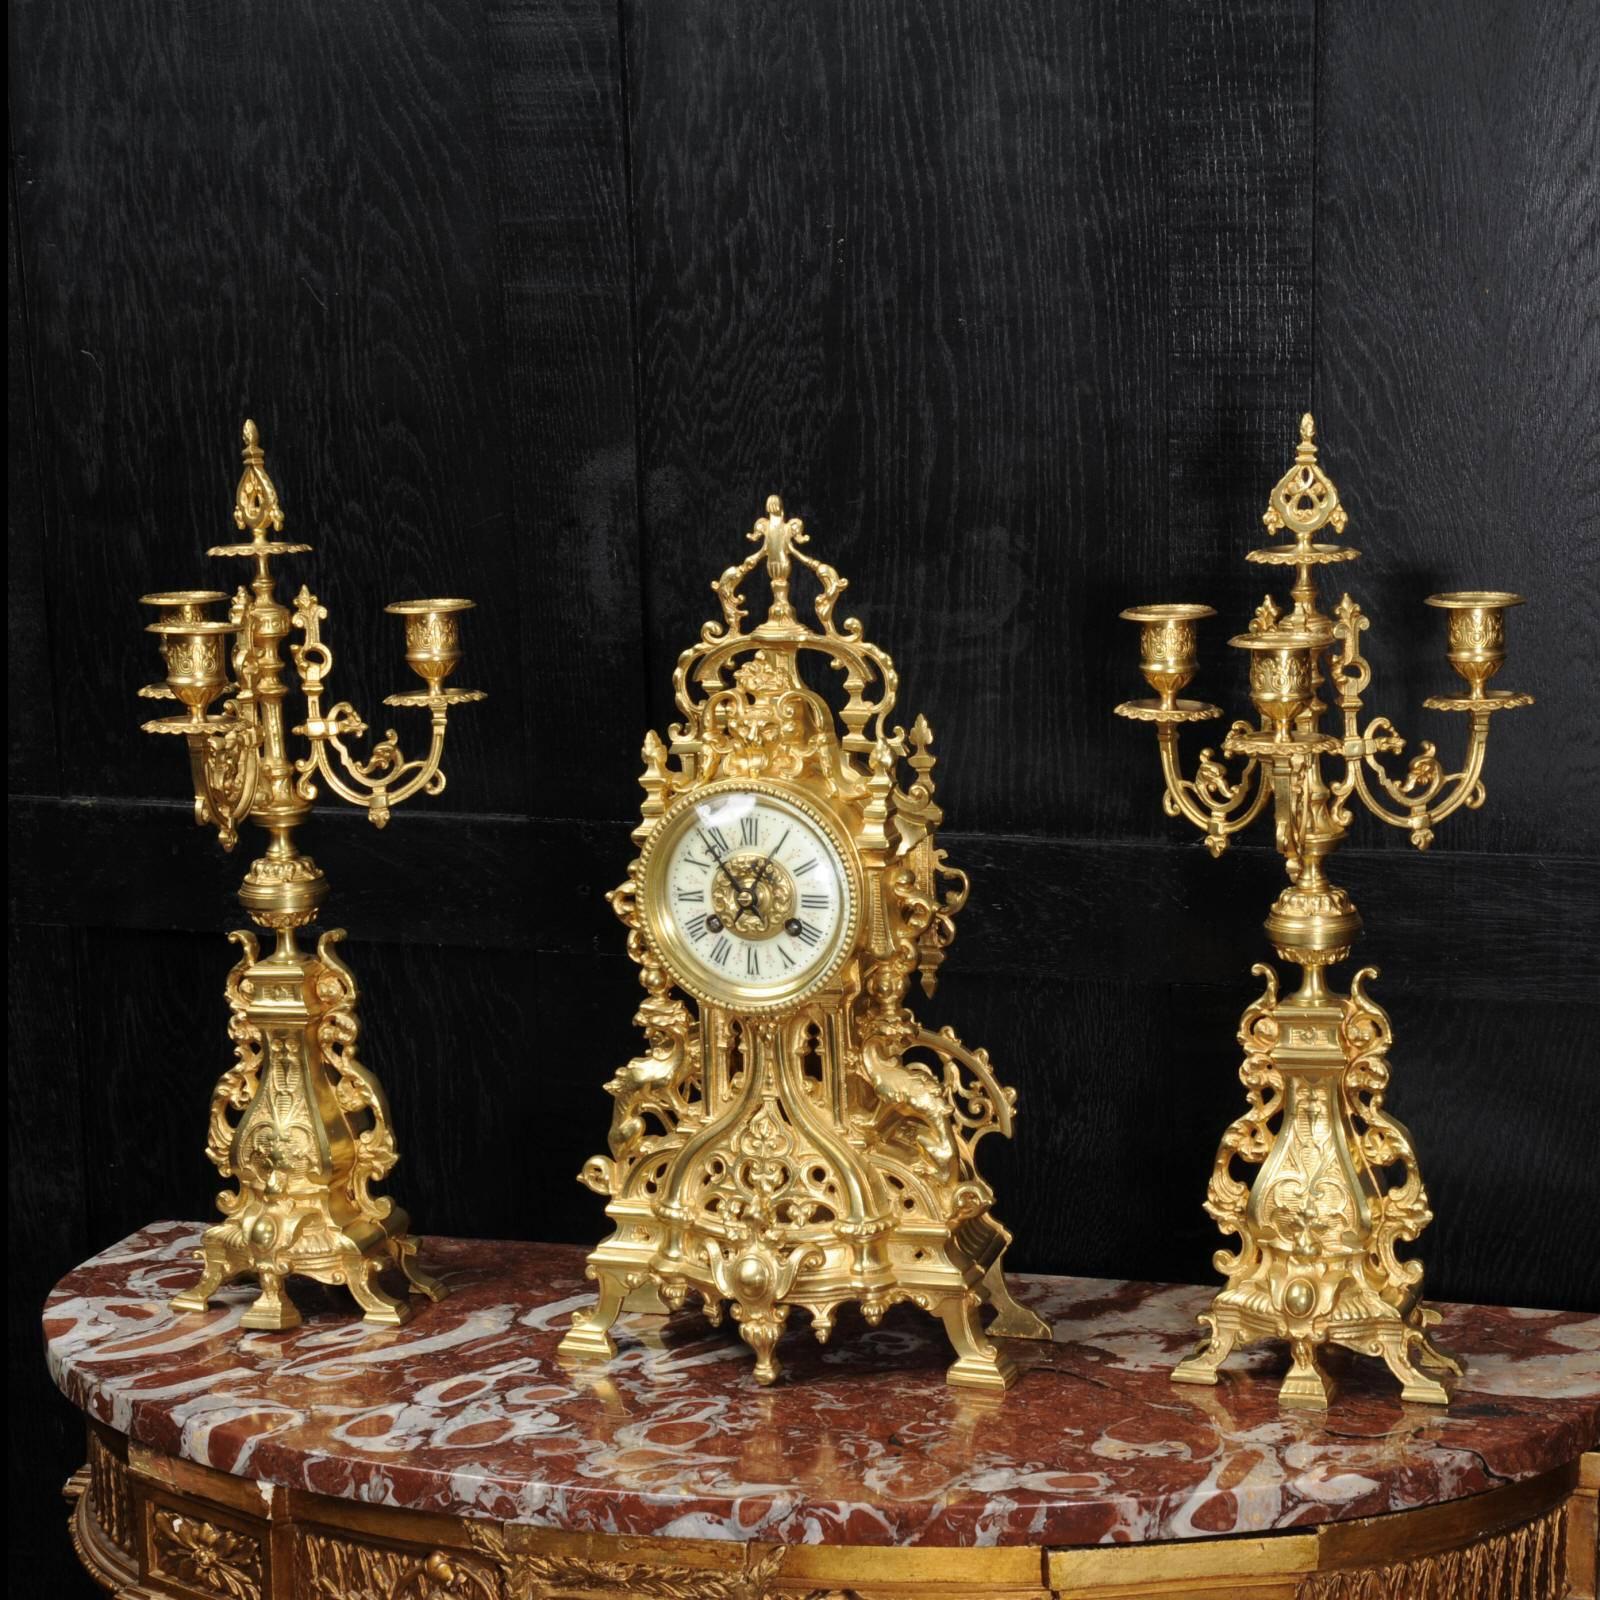 A stunning original antique French clock set by Samuel Marti dating from circa 1870. It is beautifully modelled in gilt bronze, Gothic in style with a light and delicate design of fretwork. This allows the pendulum to be seen swinging gently inside